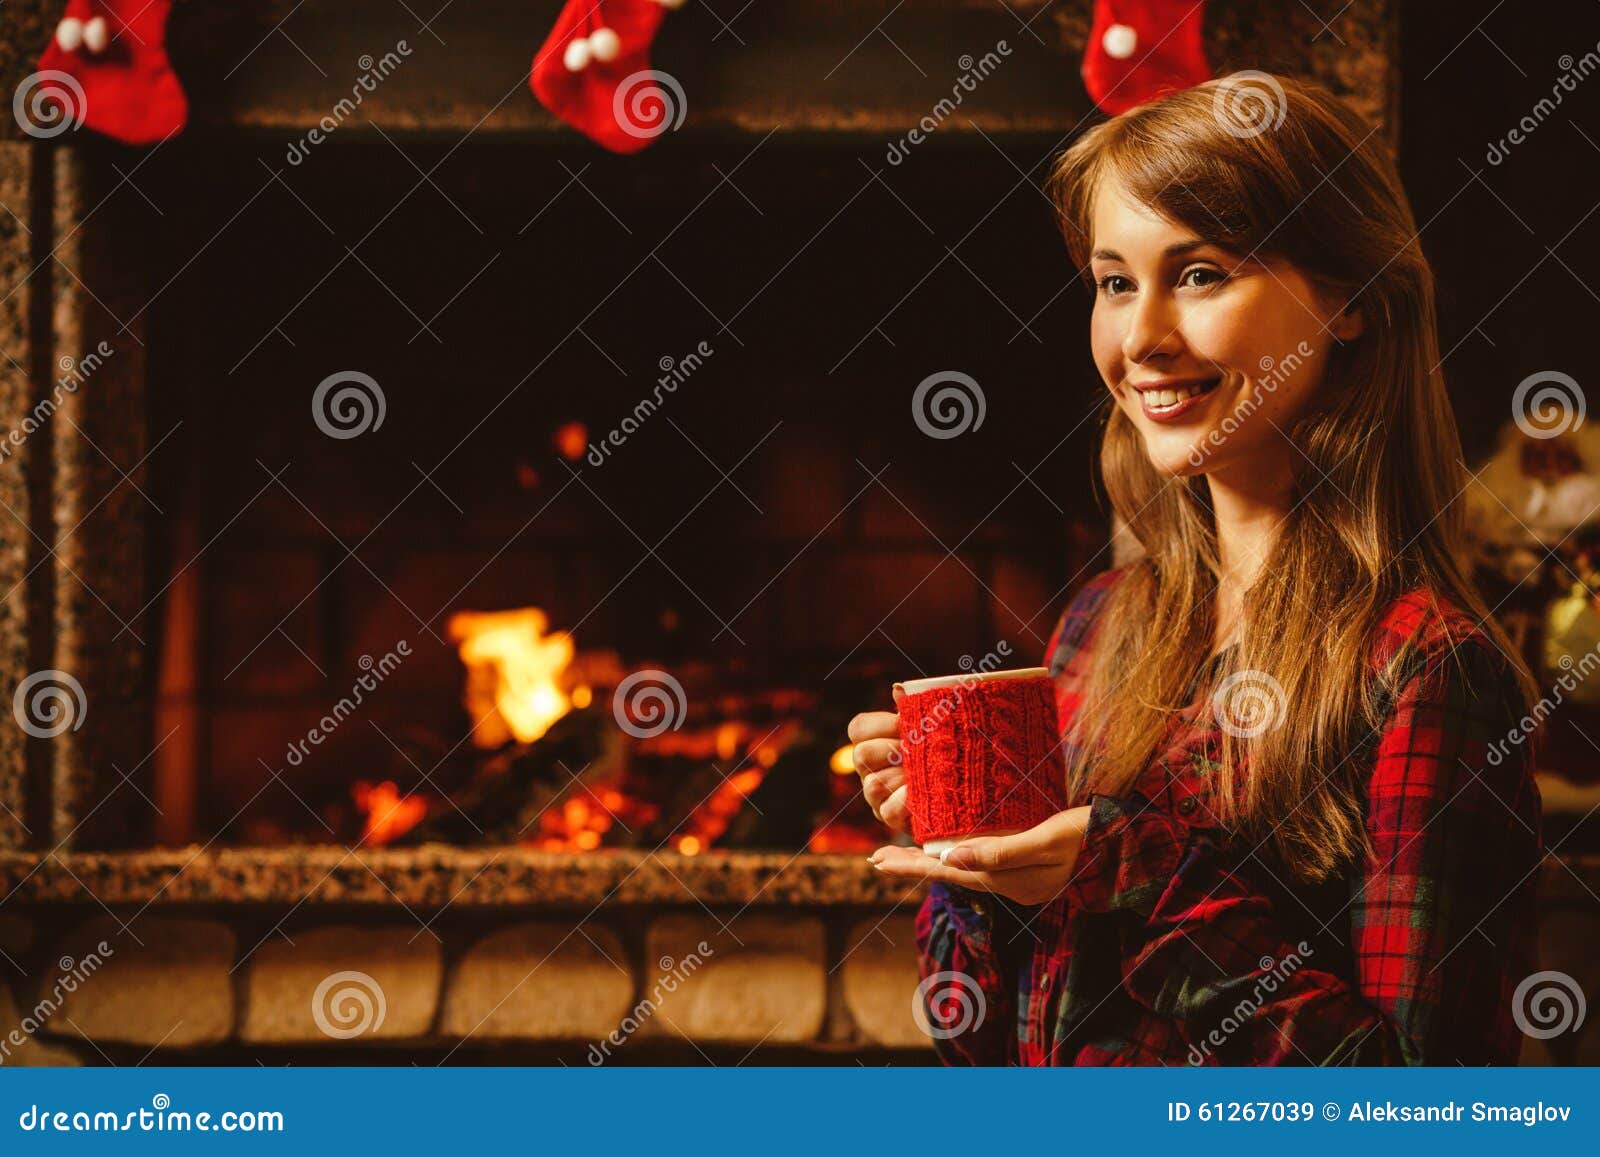 Woman with a Mug by the Fireplace. Young Attractive Woman Stock Image ...